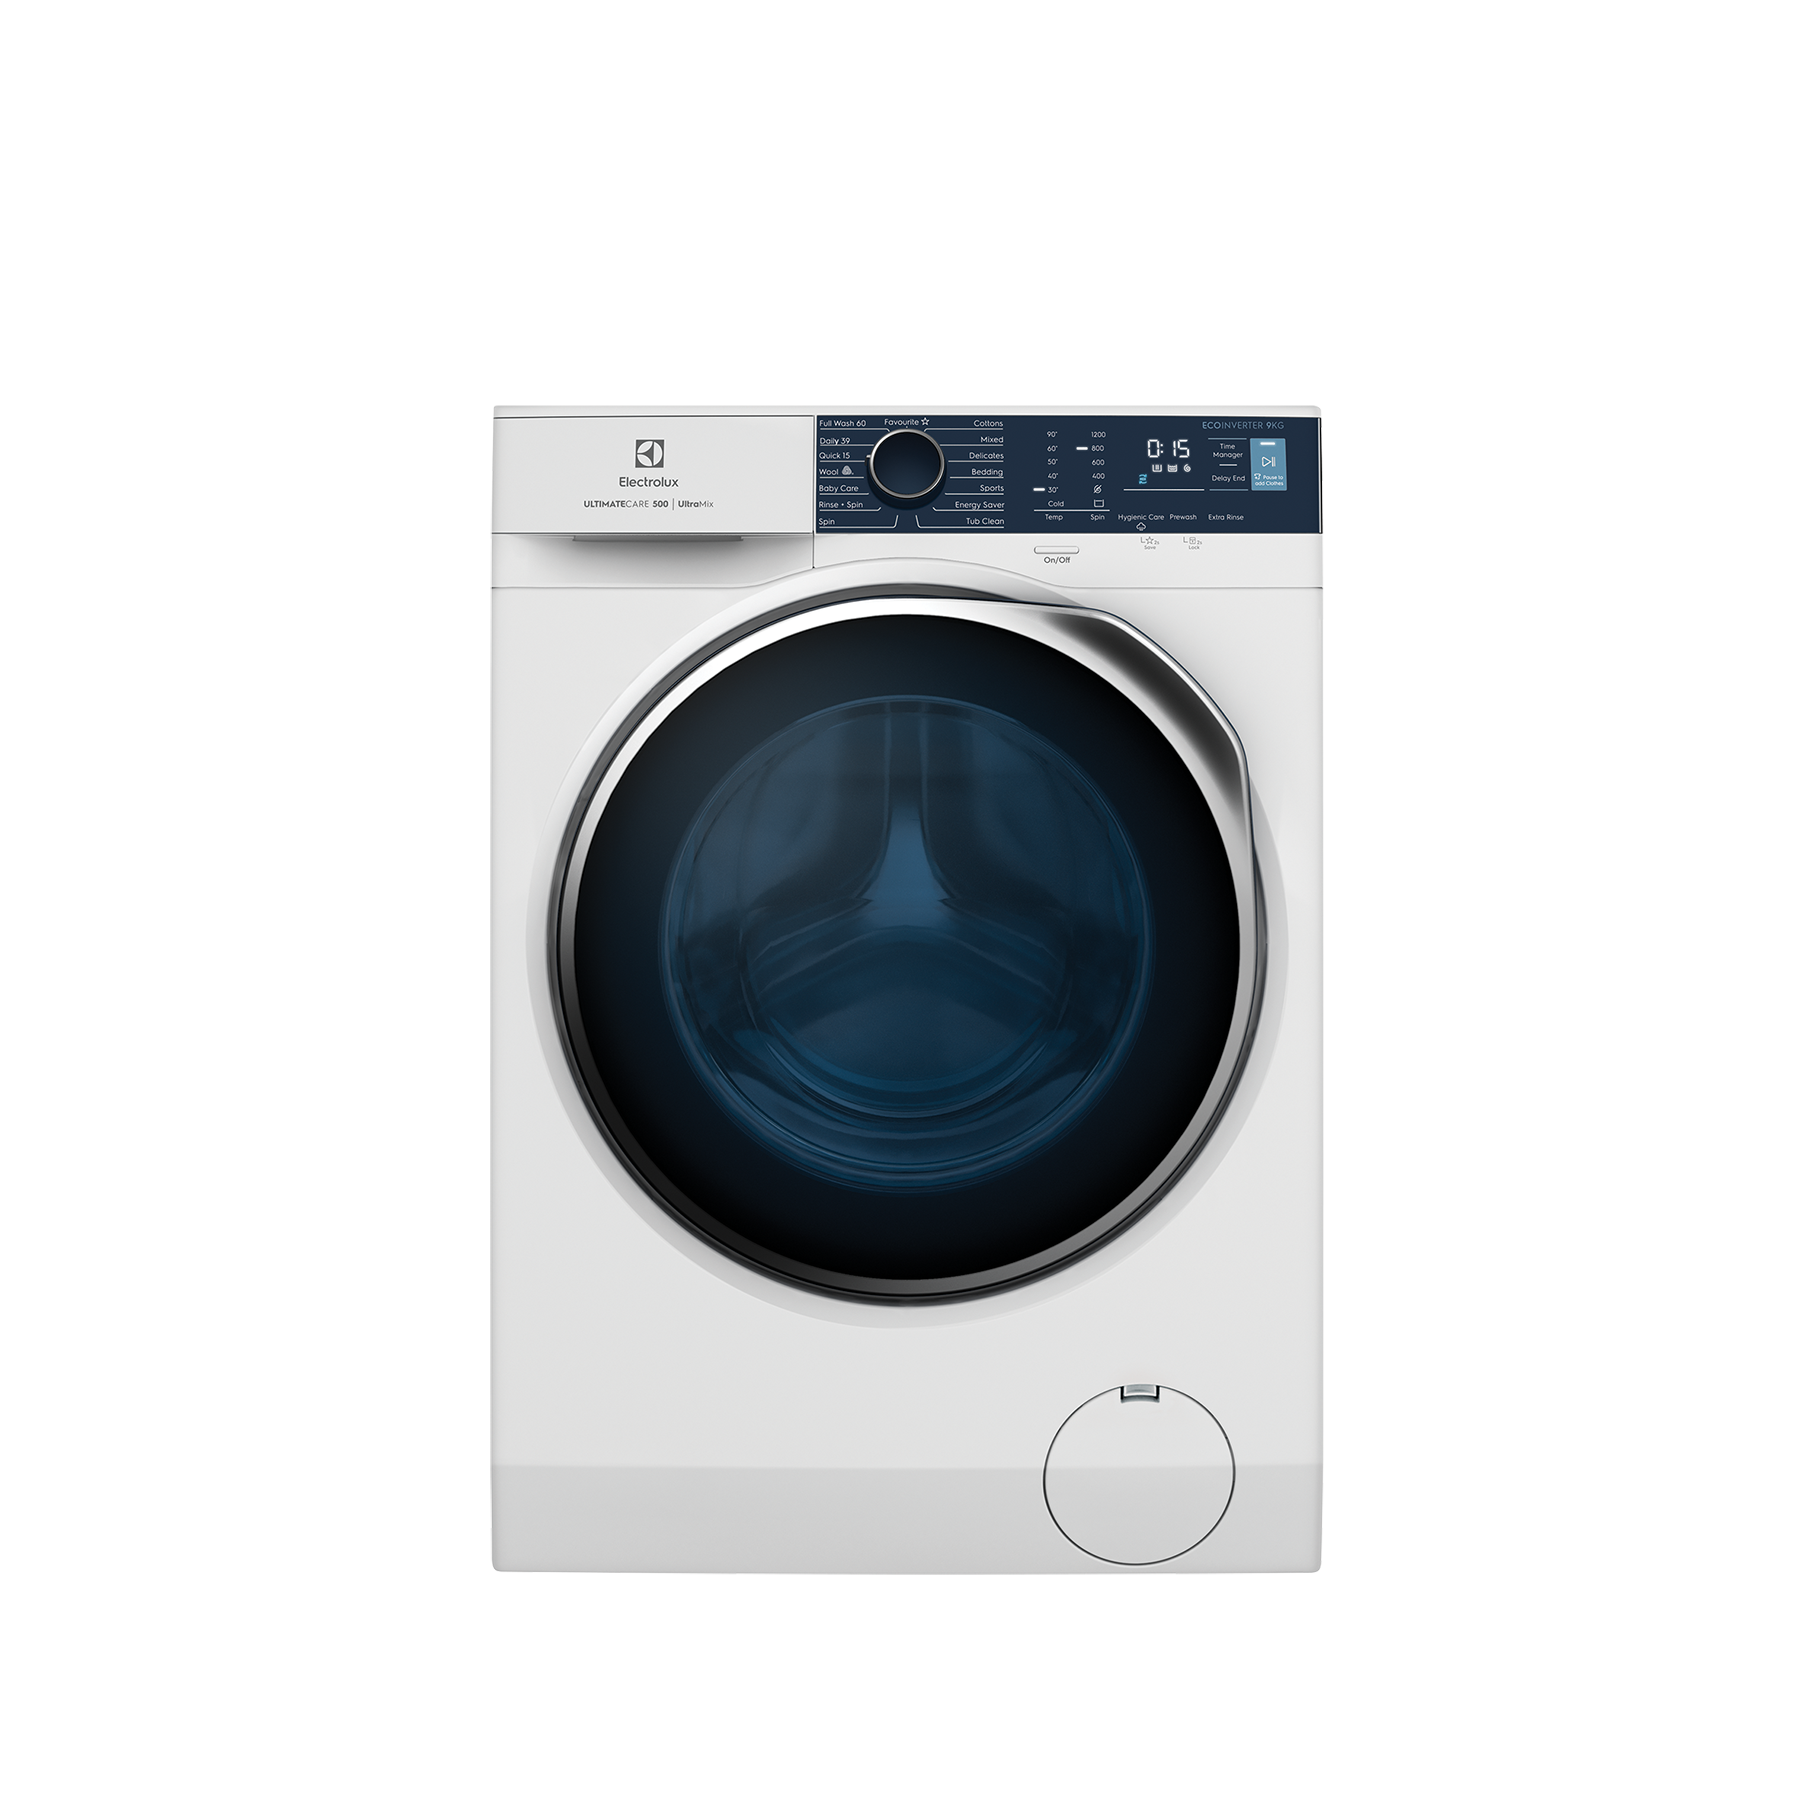 Electrolux unveils its UltimateCare range of Washing Machines & Dryers in India